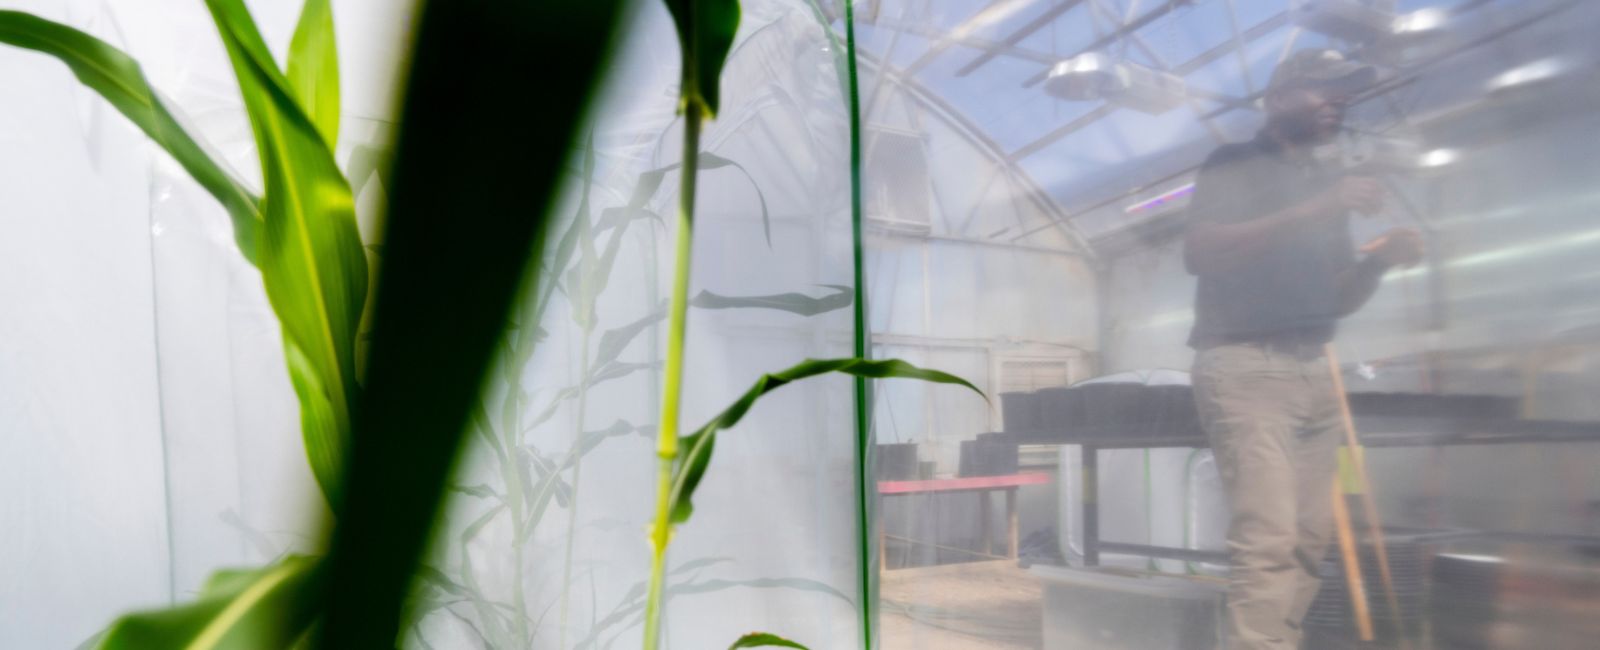 Close-up of corn stalk behind plastic as a man walks across the background